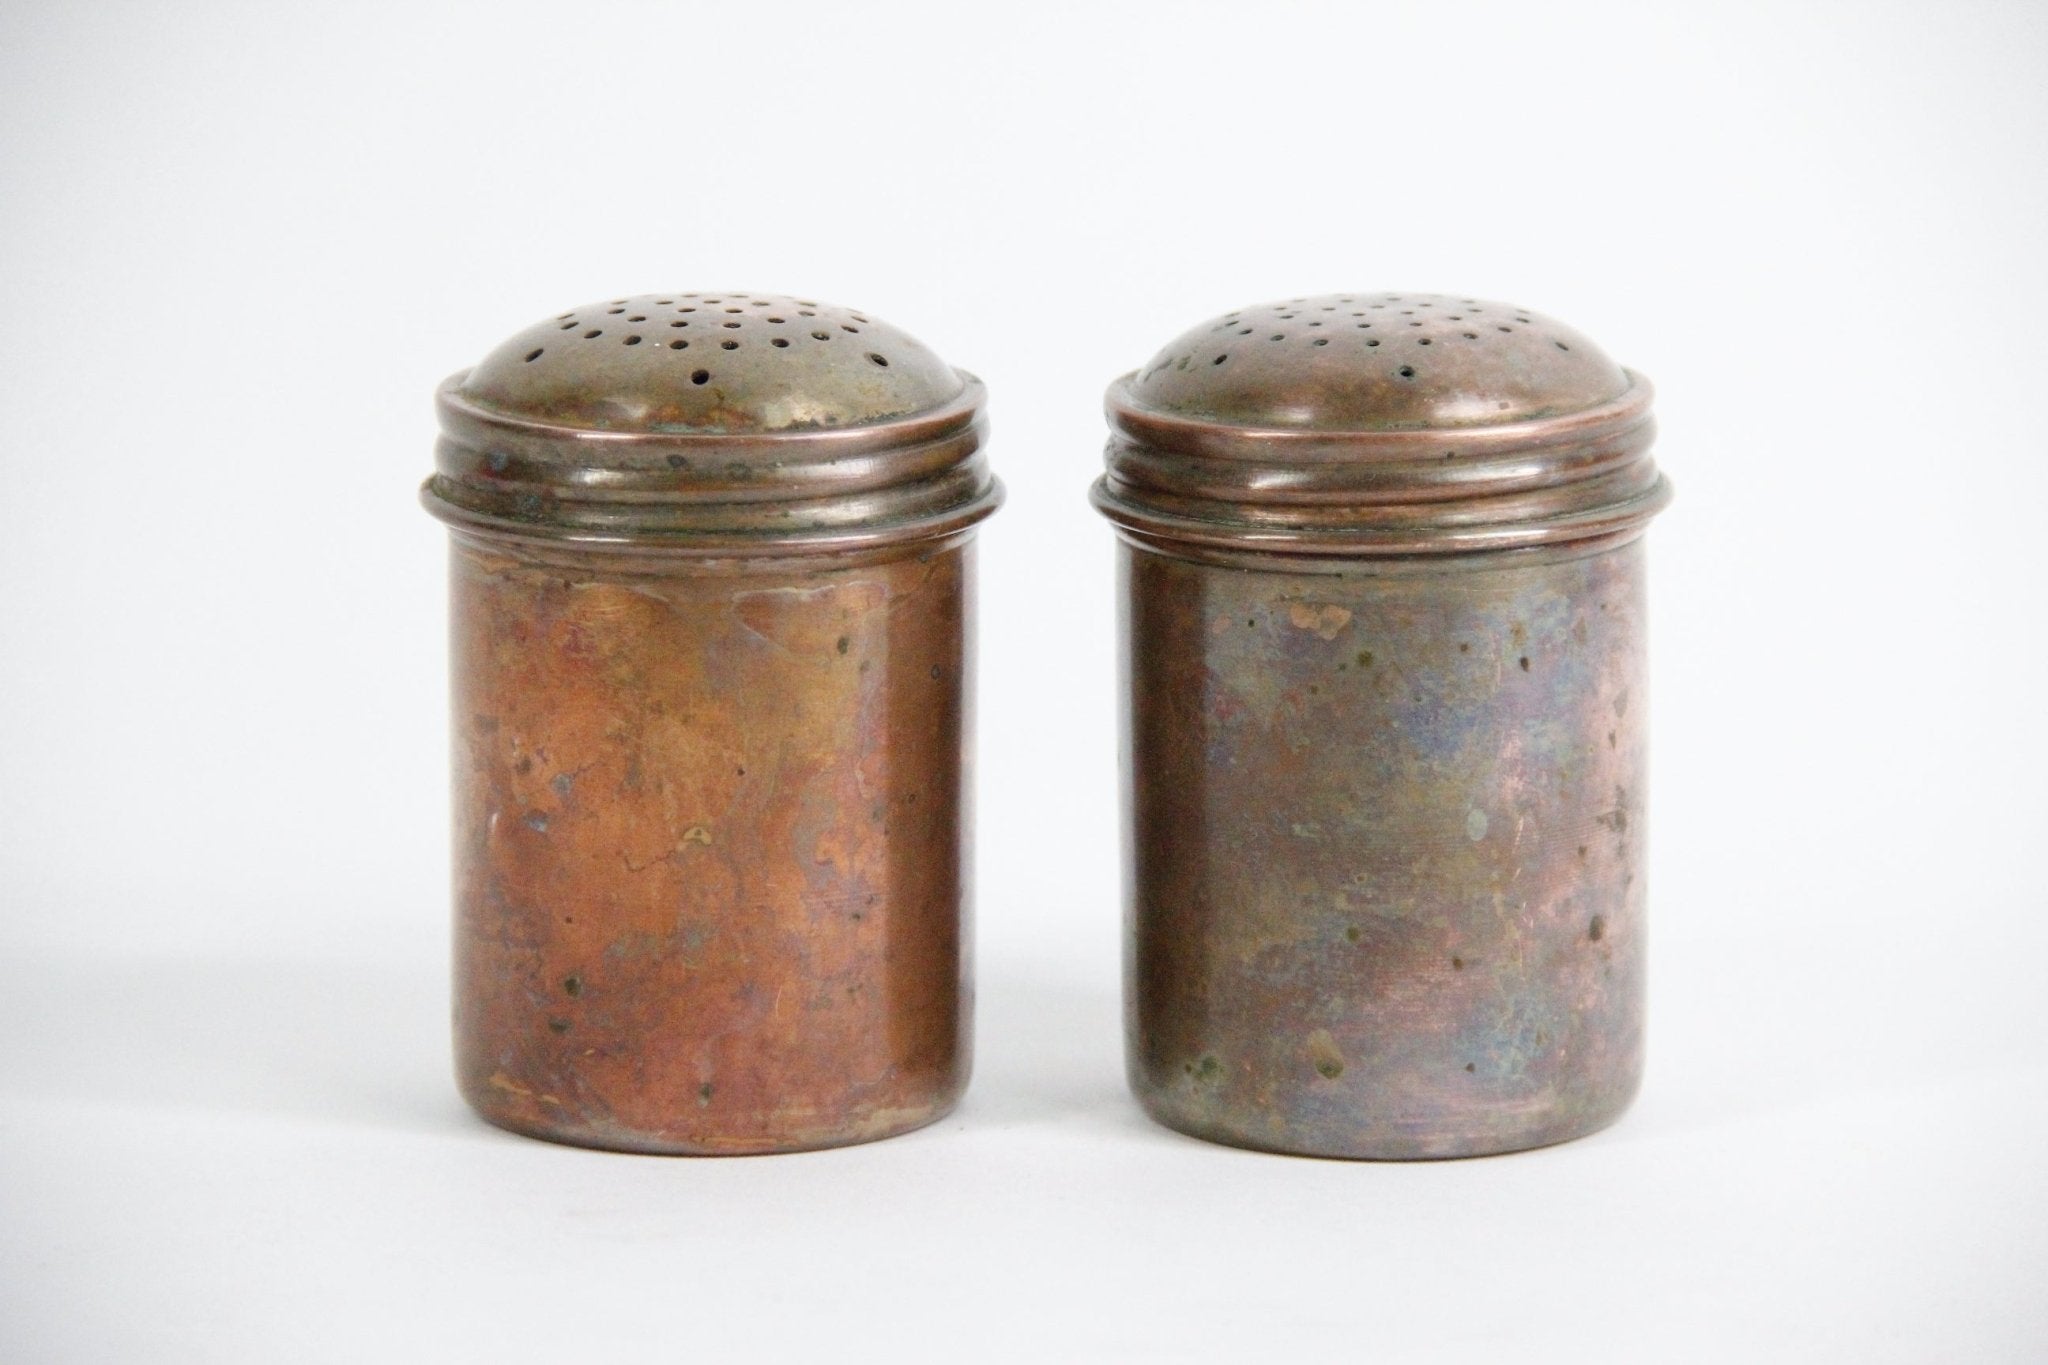 Antique Copper Salt and Pepper Shakers - Debra Hall Lifestyle